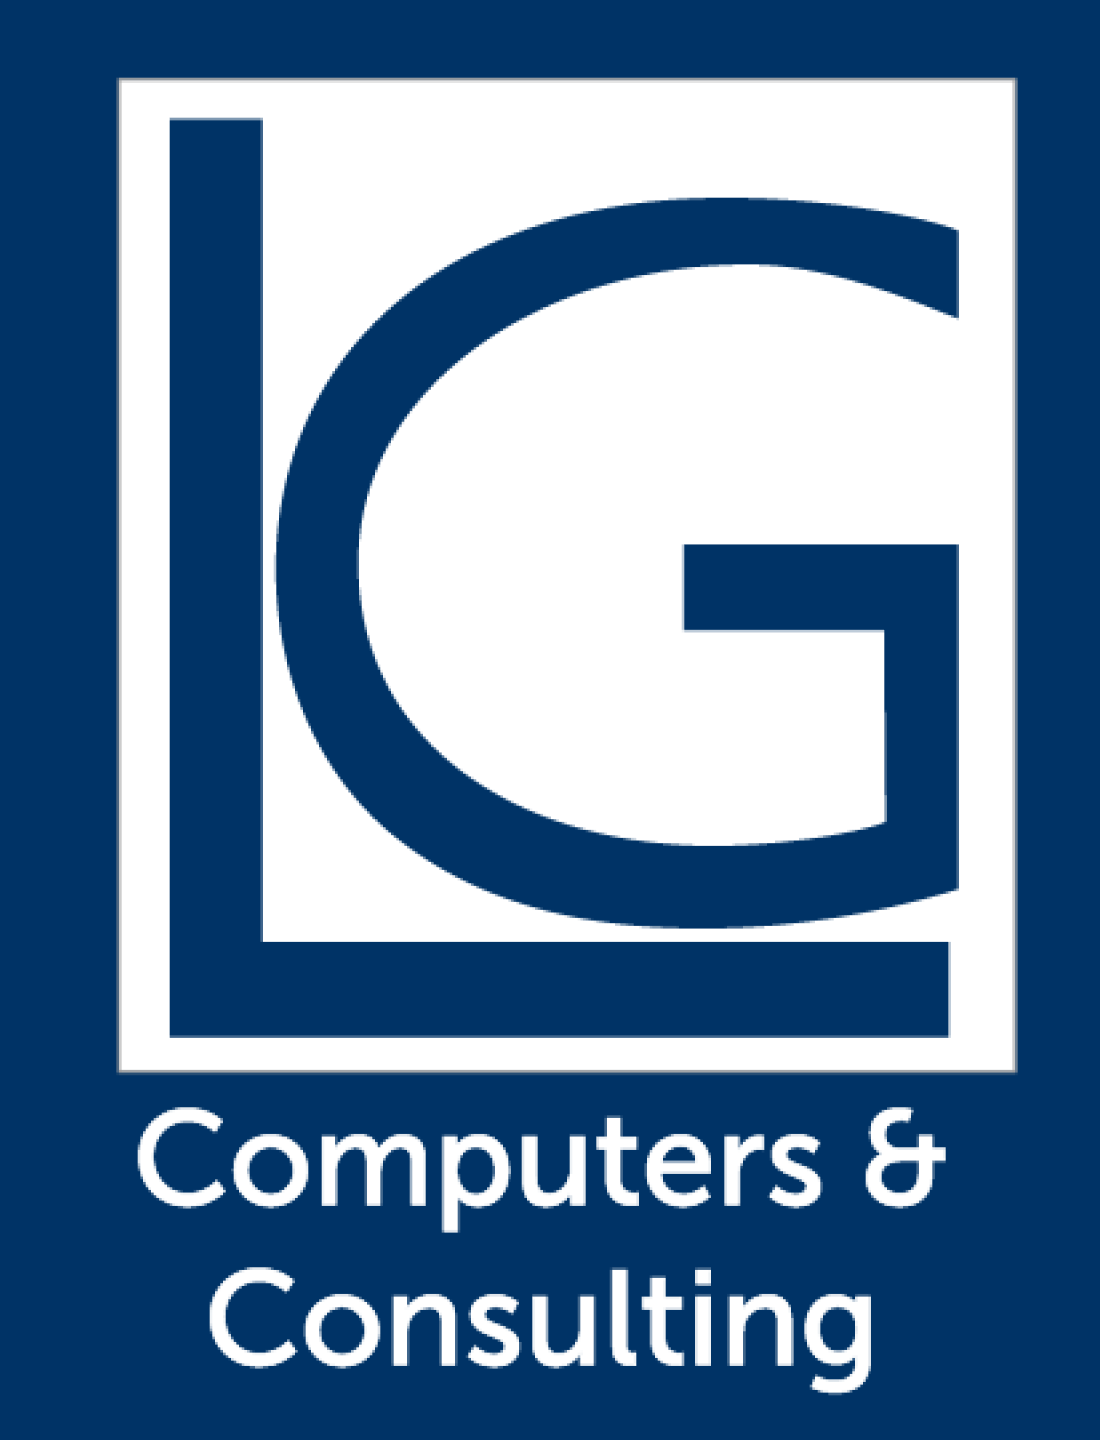 LG Computers and Consulting Services Logo